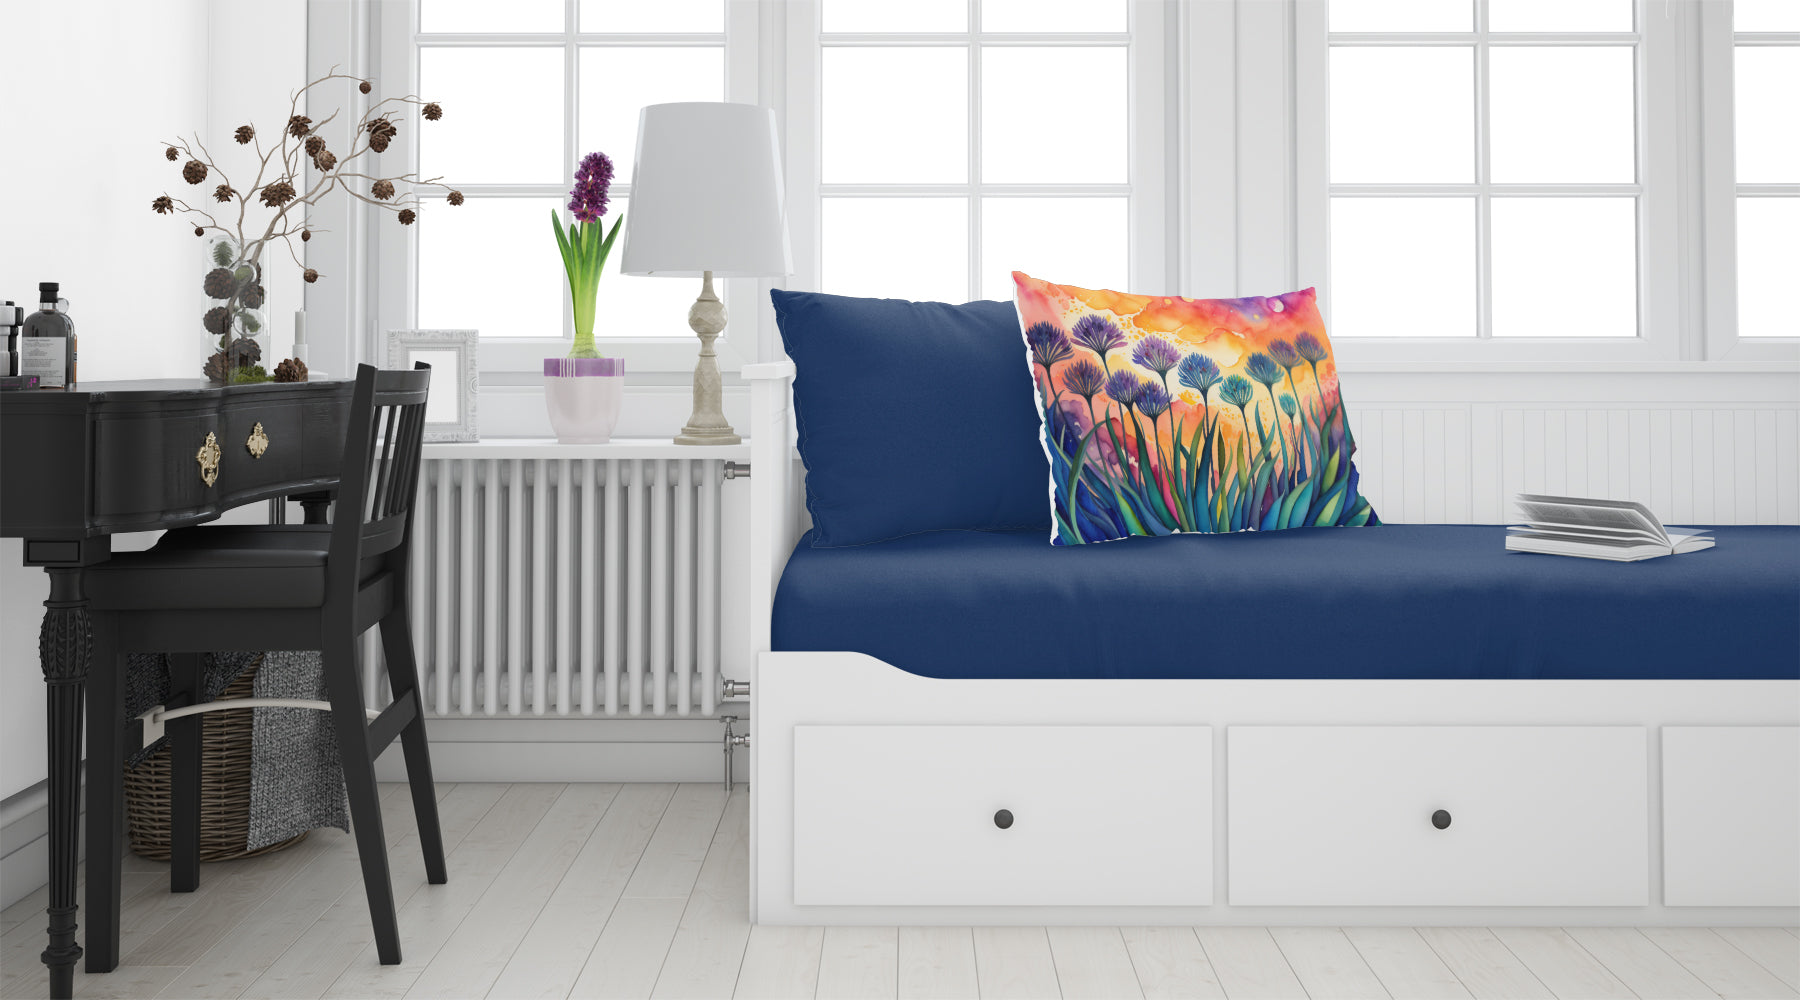 Buy this Agapanthus in Color Fabric Standard Pillowcase